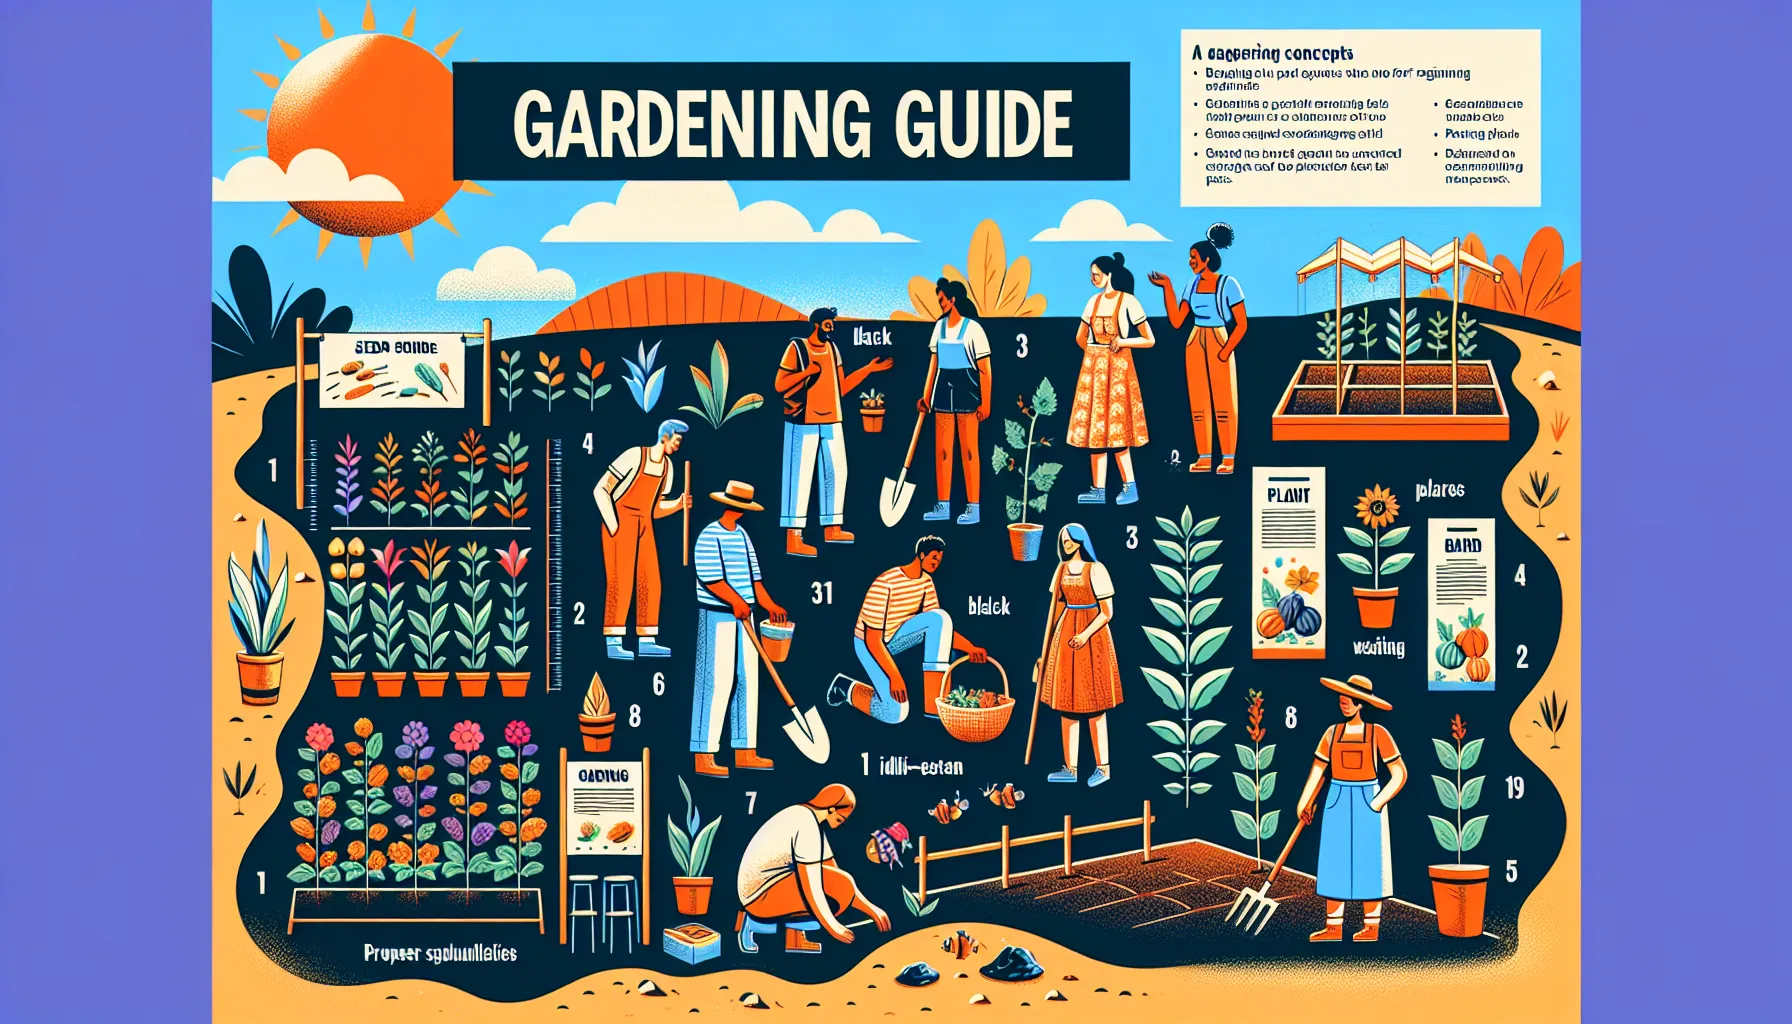 An illustrated gardening guide with various plants and people engaged in gardening activities under a bright sun.